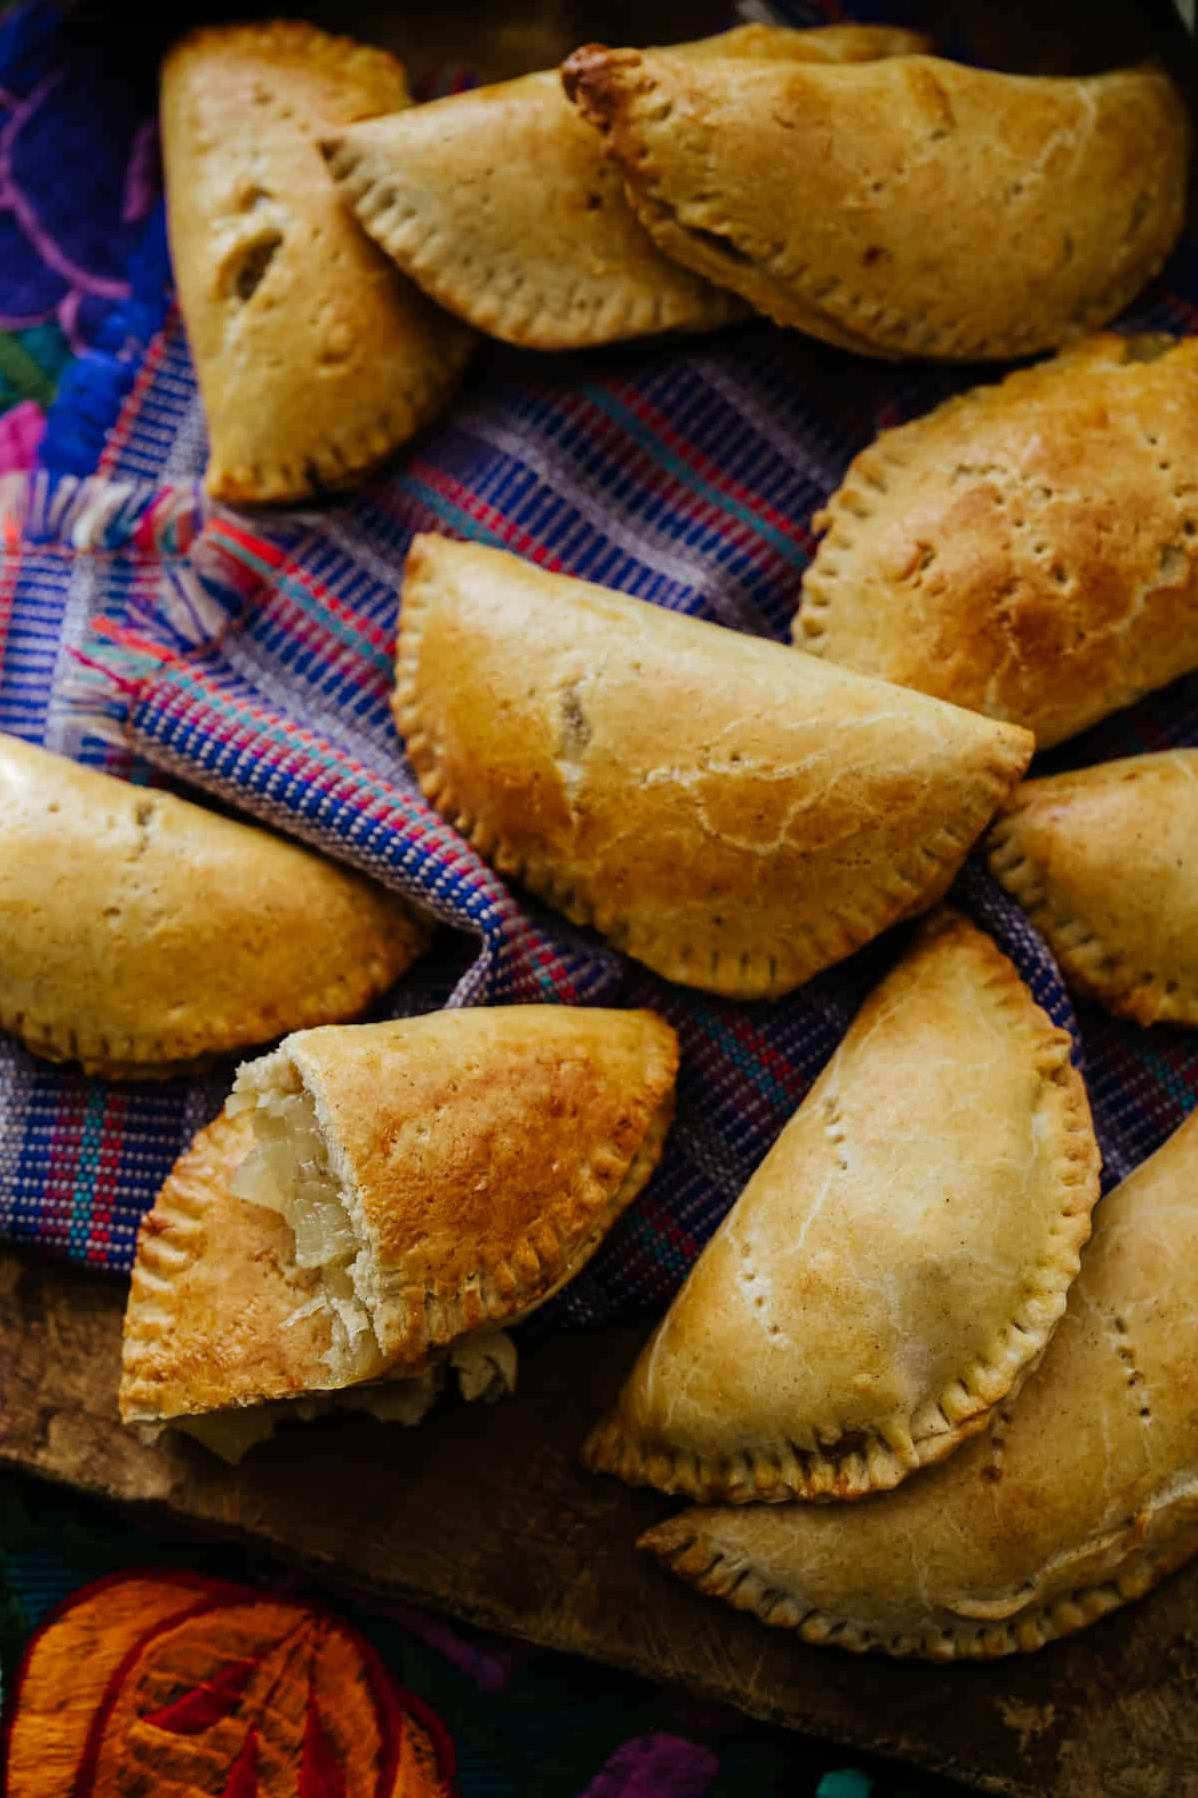  Perfectly golden and crispy, these empanadas are sure to make your mouth water.